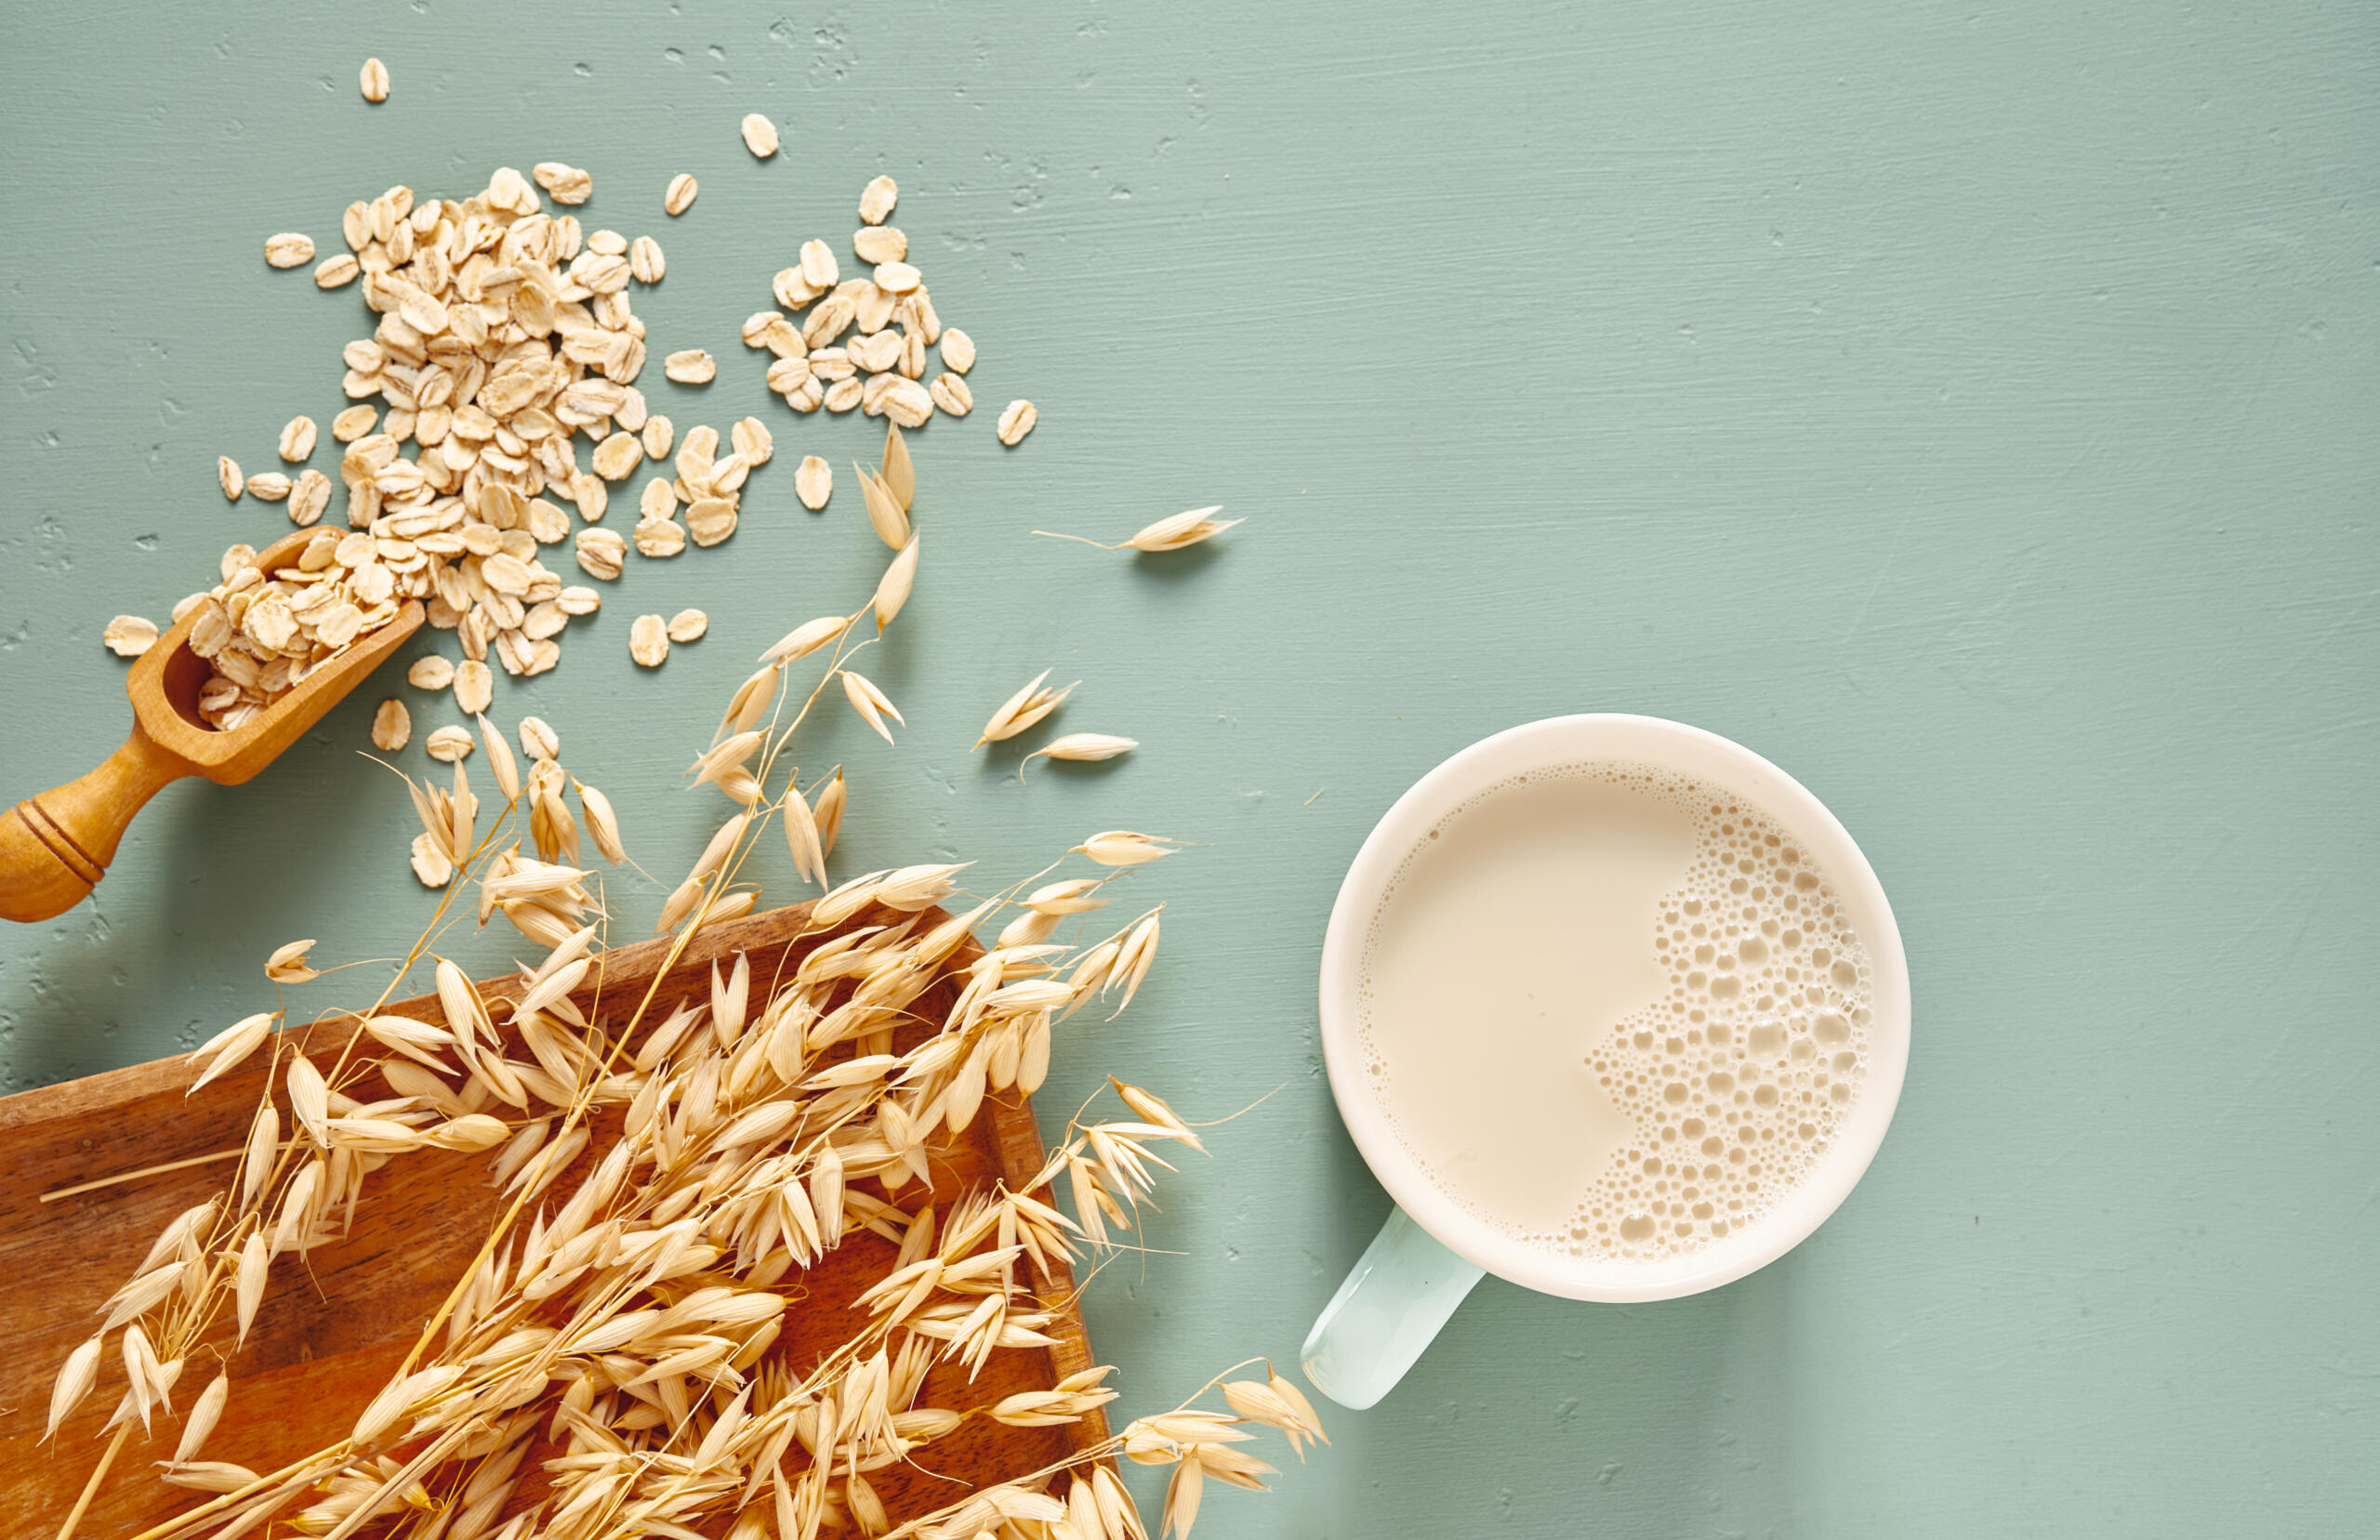 Why Does Oat Milk Separate from Coffee?